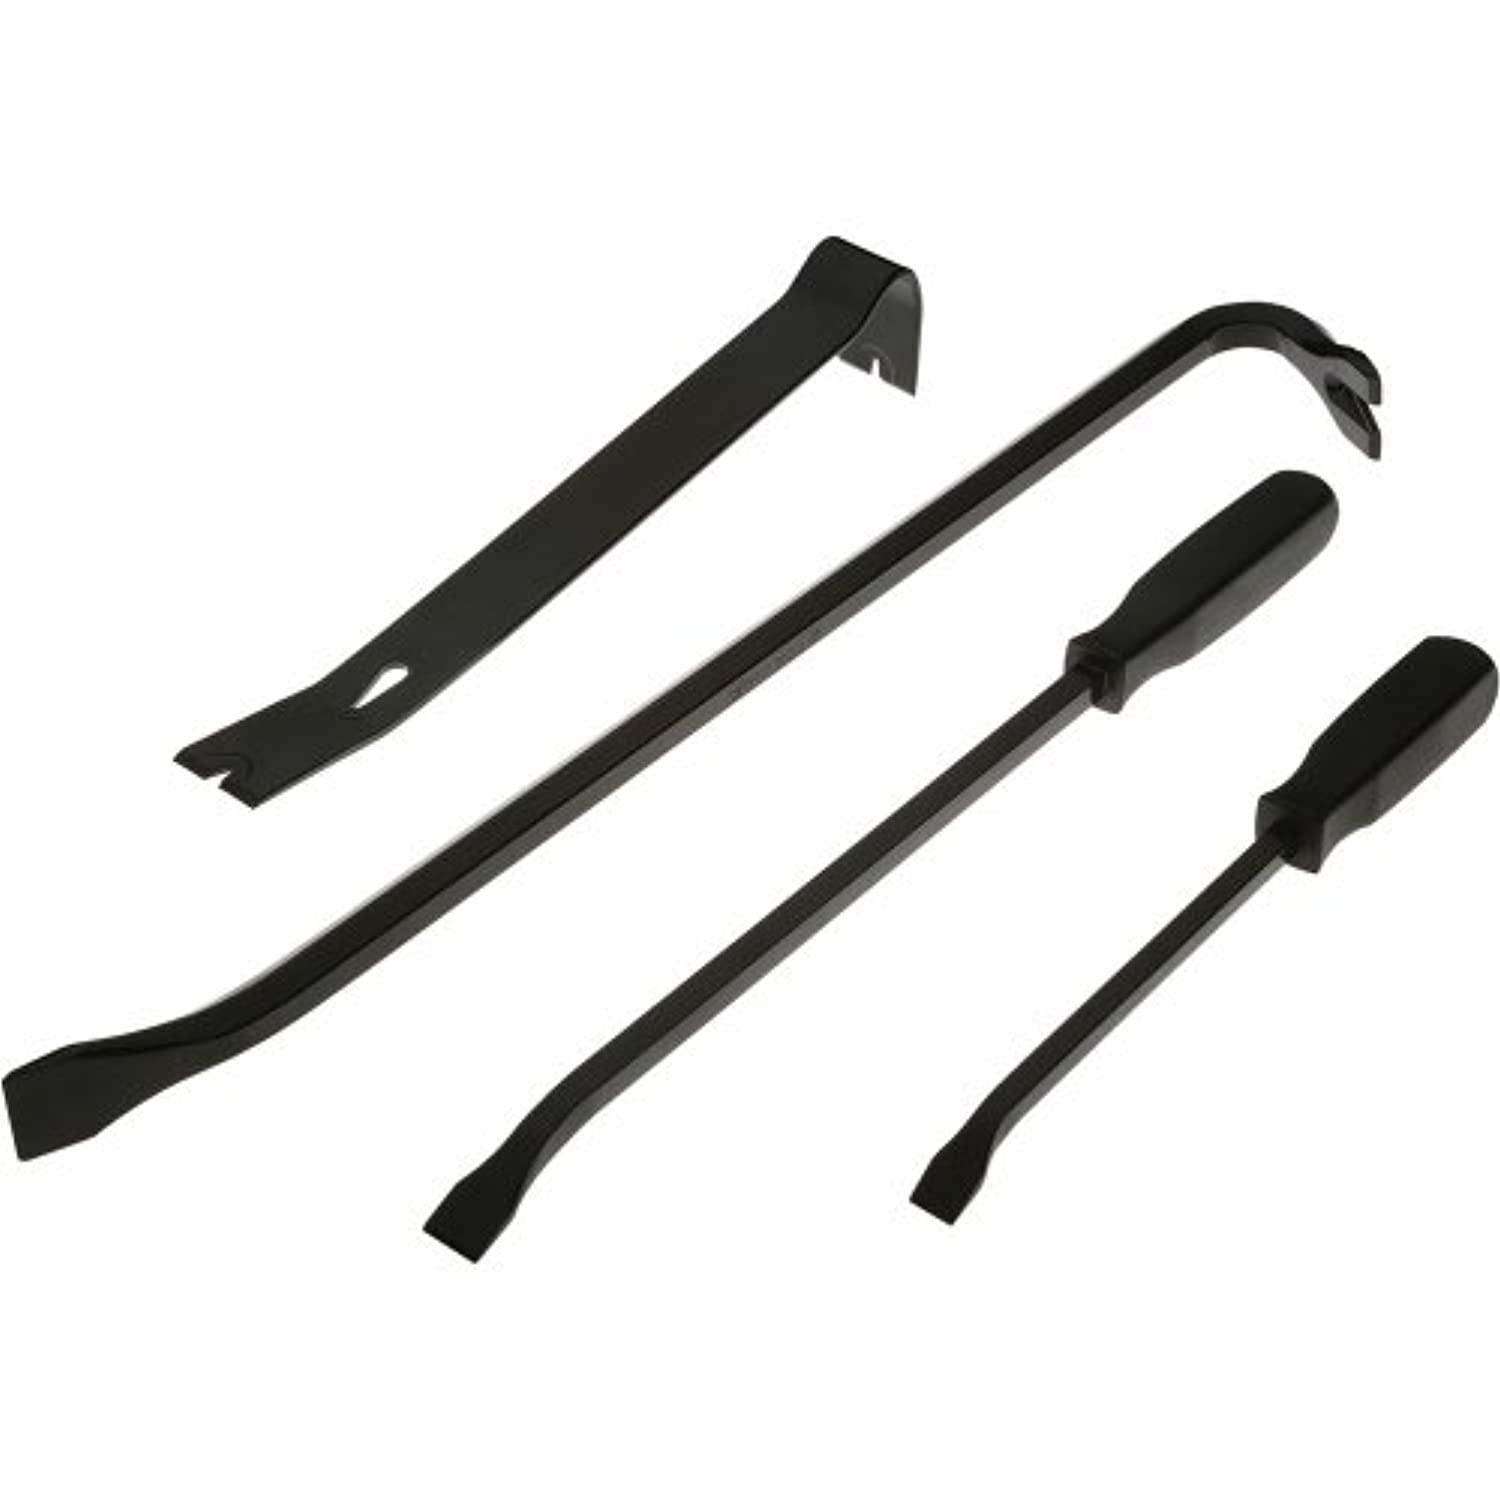 grizzly t10174 4 piece pry bar set